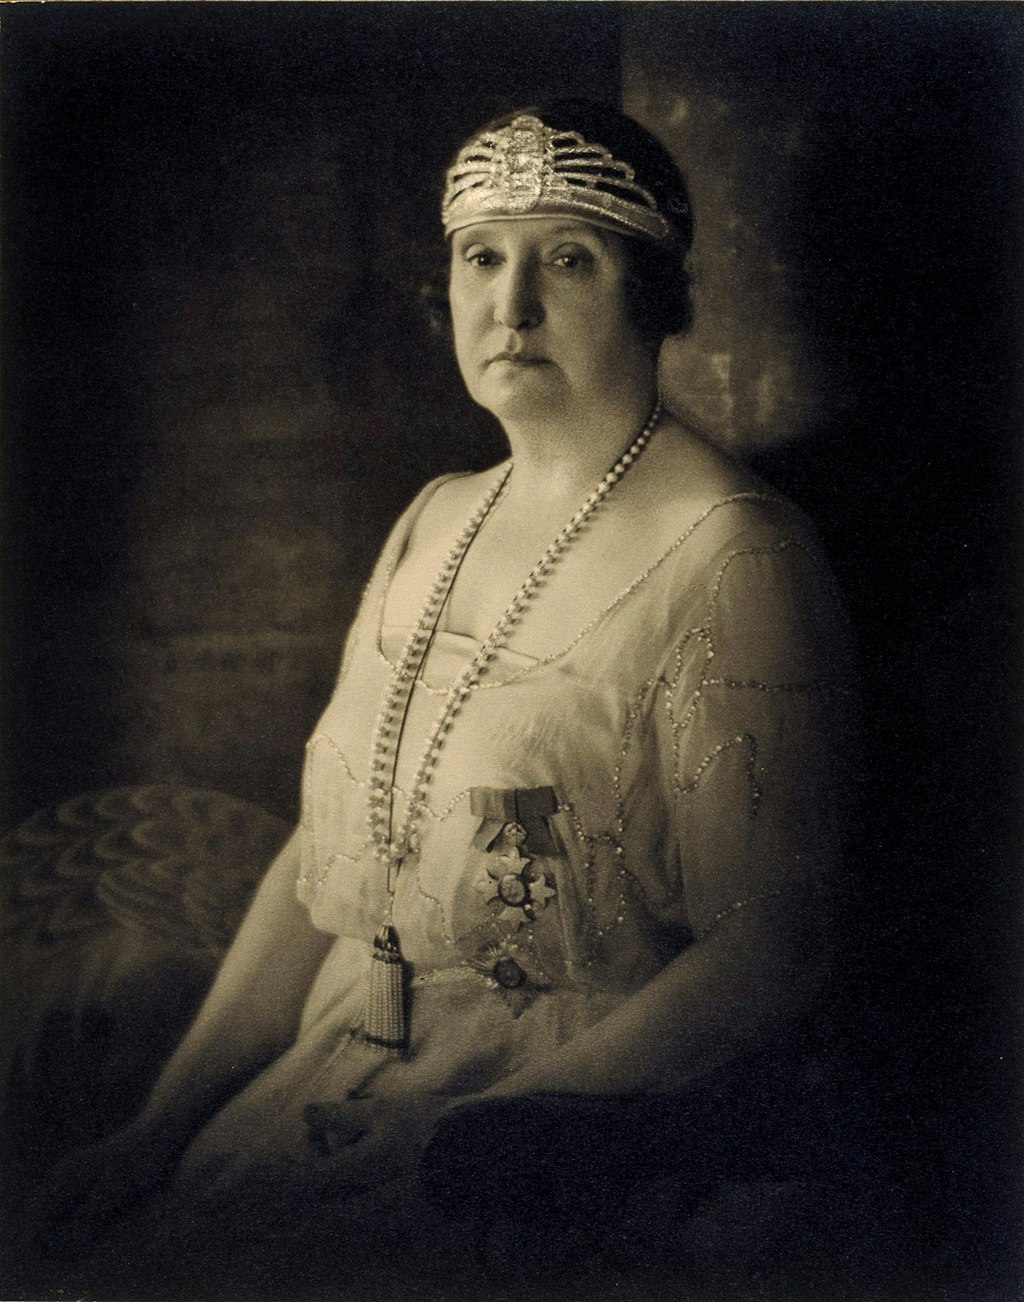 A seated woman dressed in a chiffon dress with sparkly embroidery. She wears a ribboned medal on her chest, long necklaces and a jewelled headpiece around her bobbed hair.